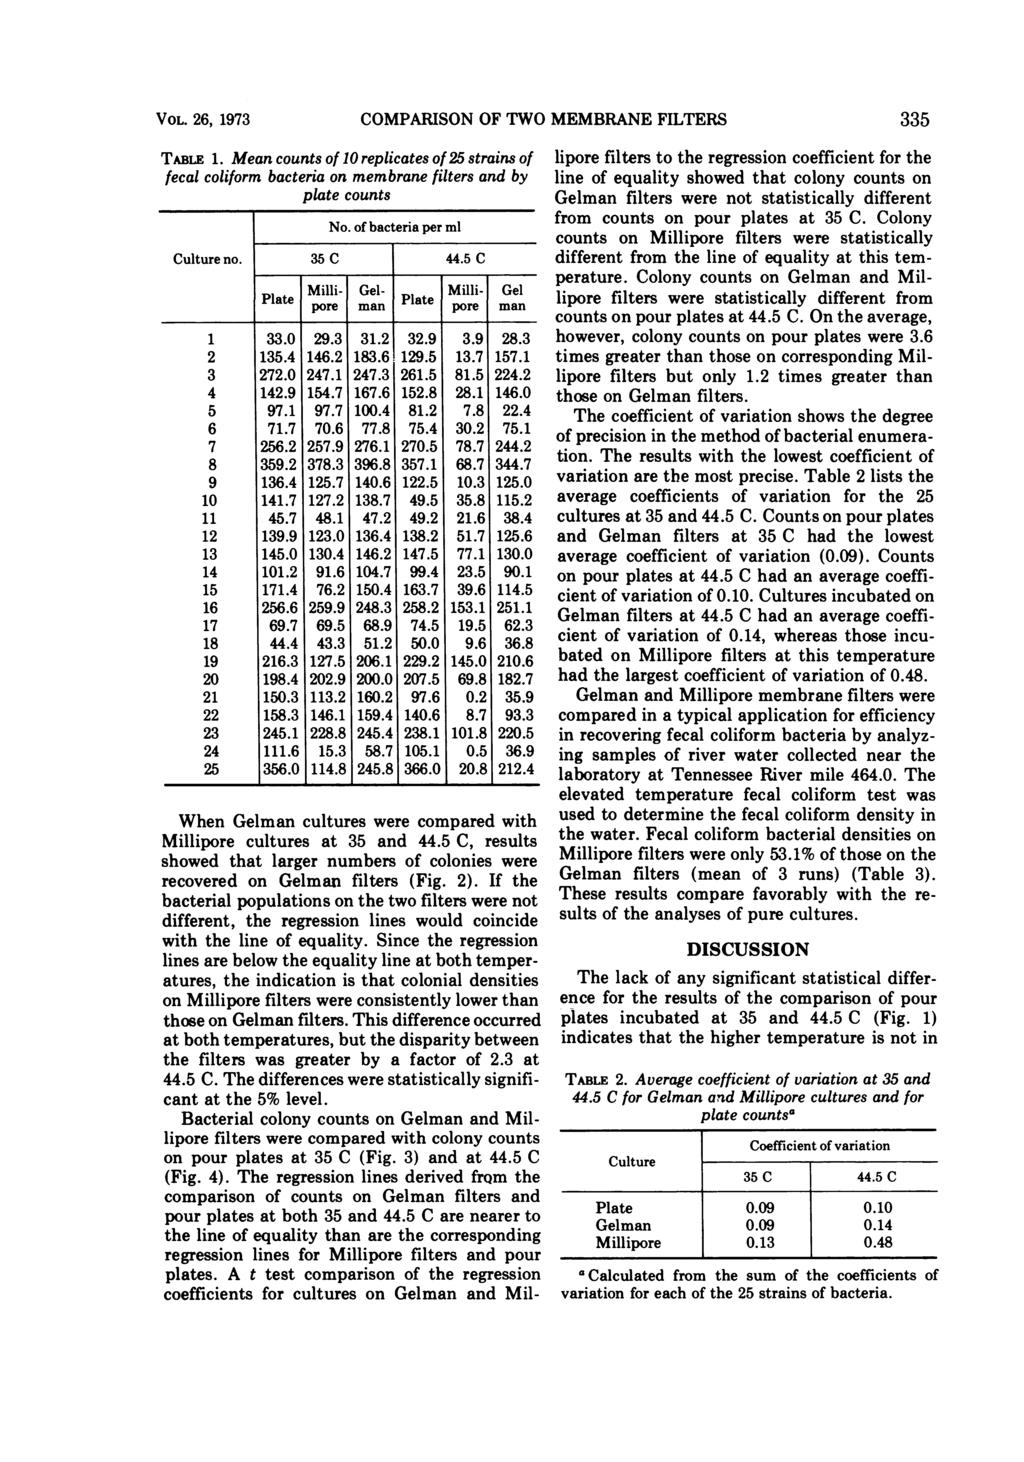 VOL. 26, 1973 COMPARISON OF TWO MEMBRANE FILTERS 335 TABLE 1. Mean counts of 10 replicates of 25 strains of fecal coliform bacteria on membrane filters and by plate counts No.